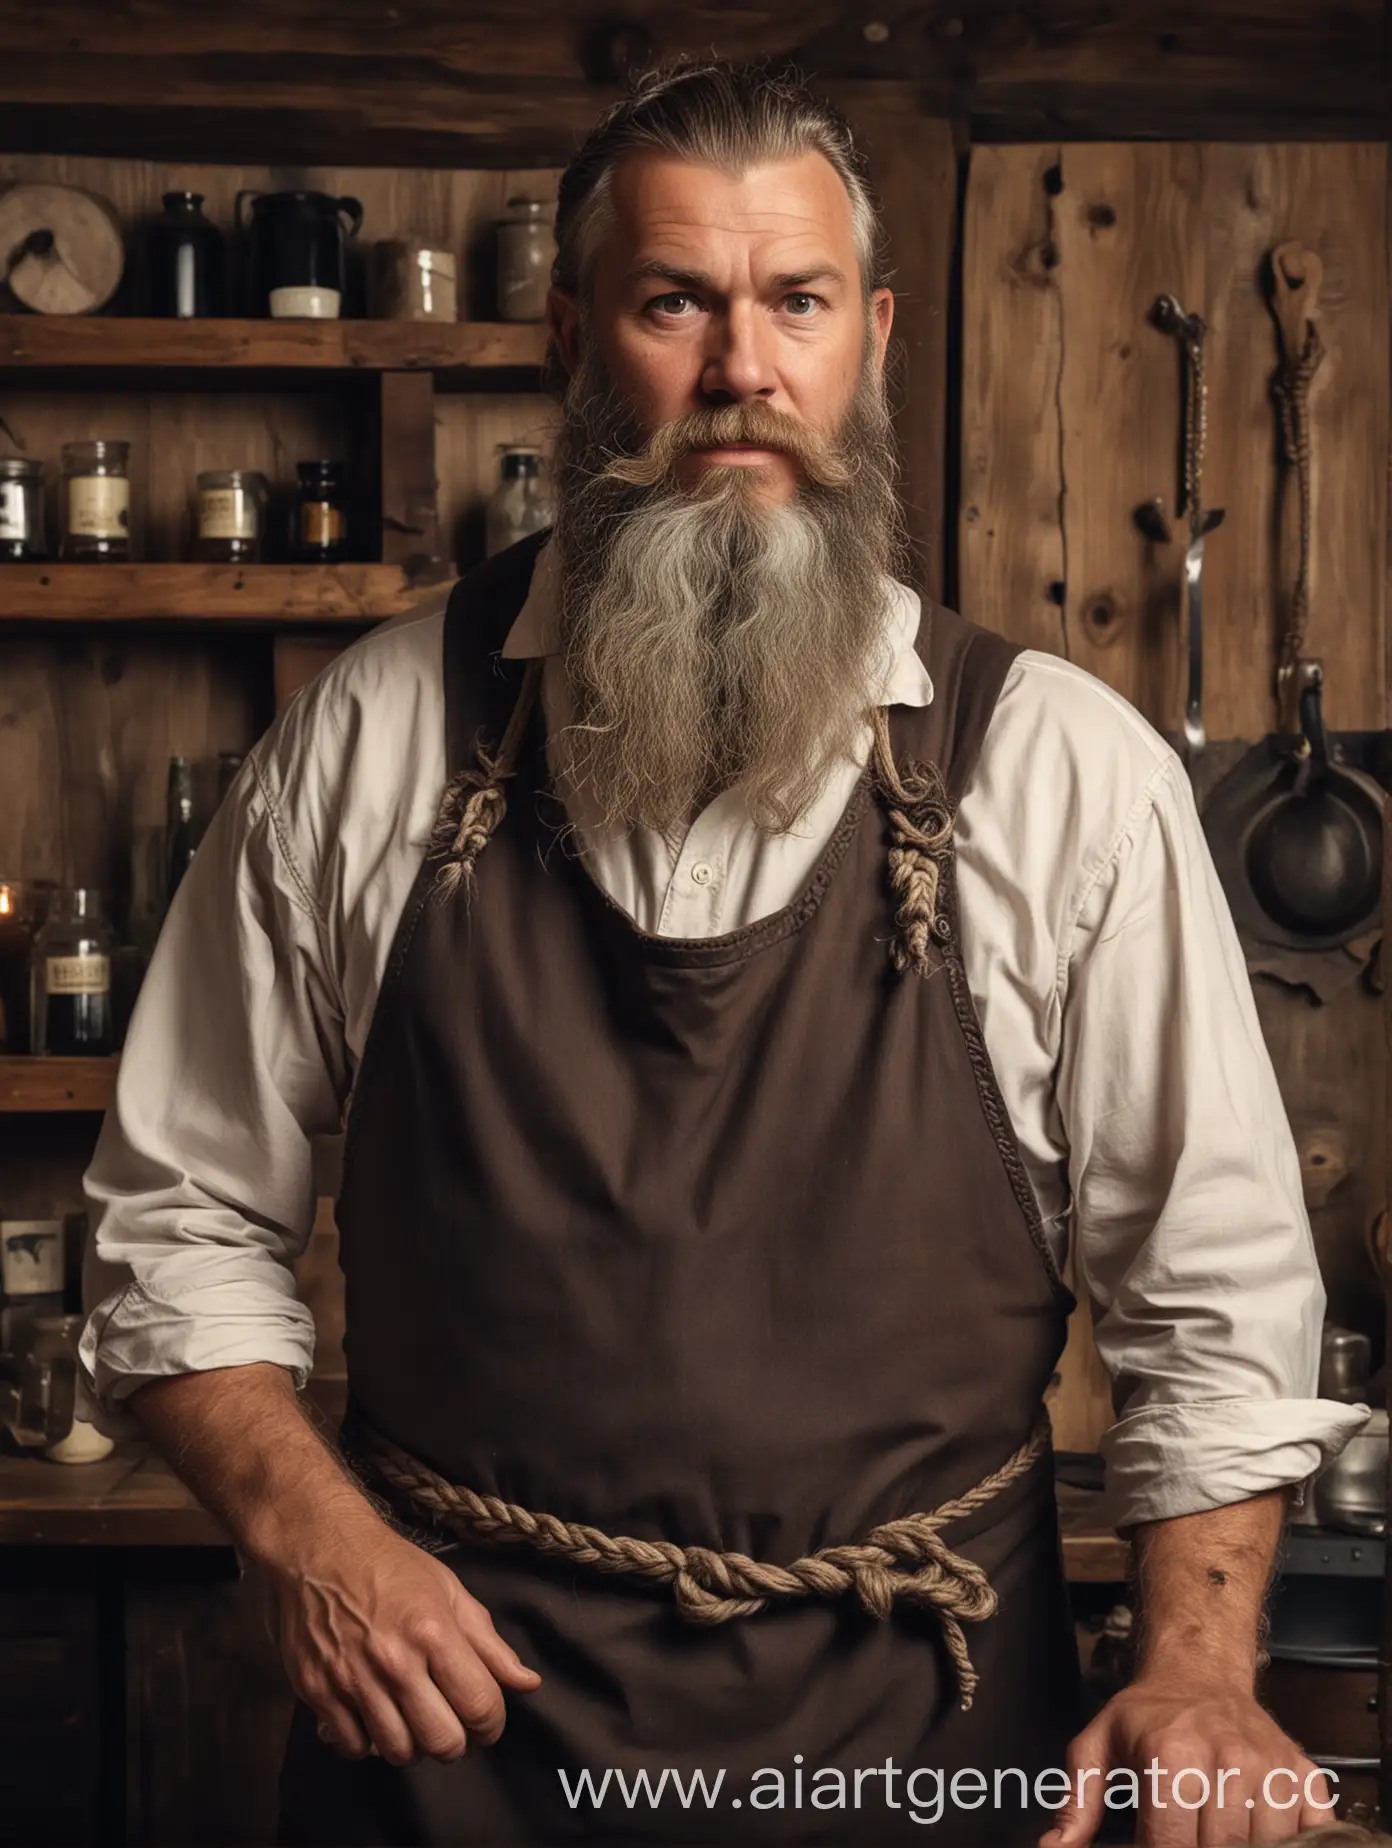 Stoic-Viking-Tavern-Owner-with-Braided-Beard-in-Apron